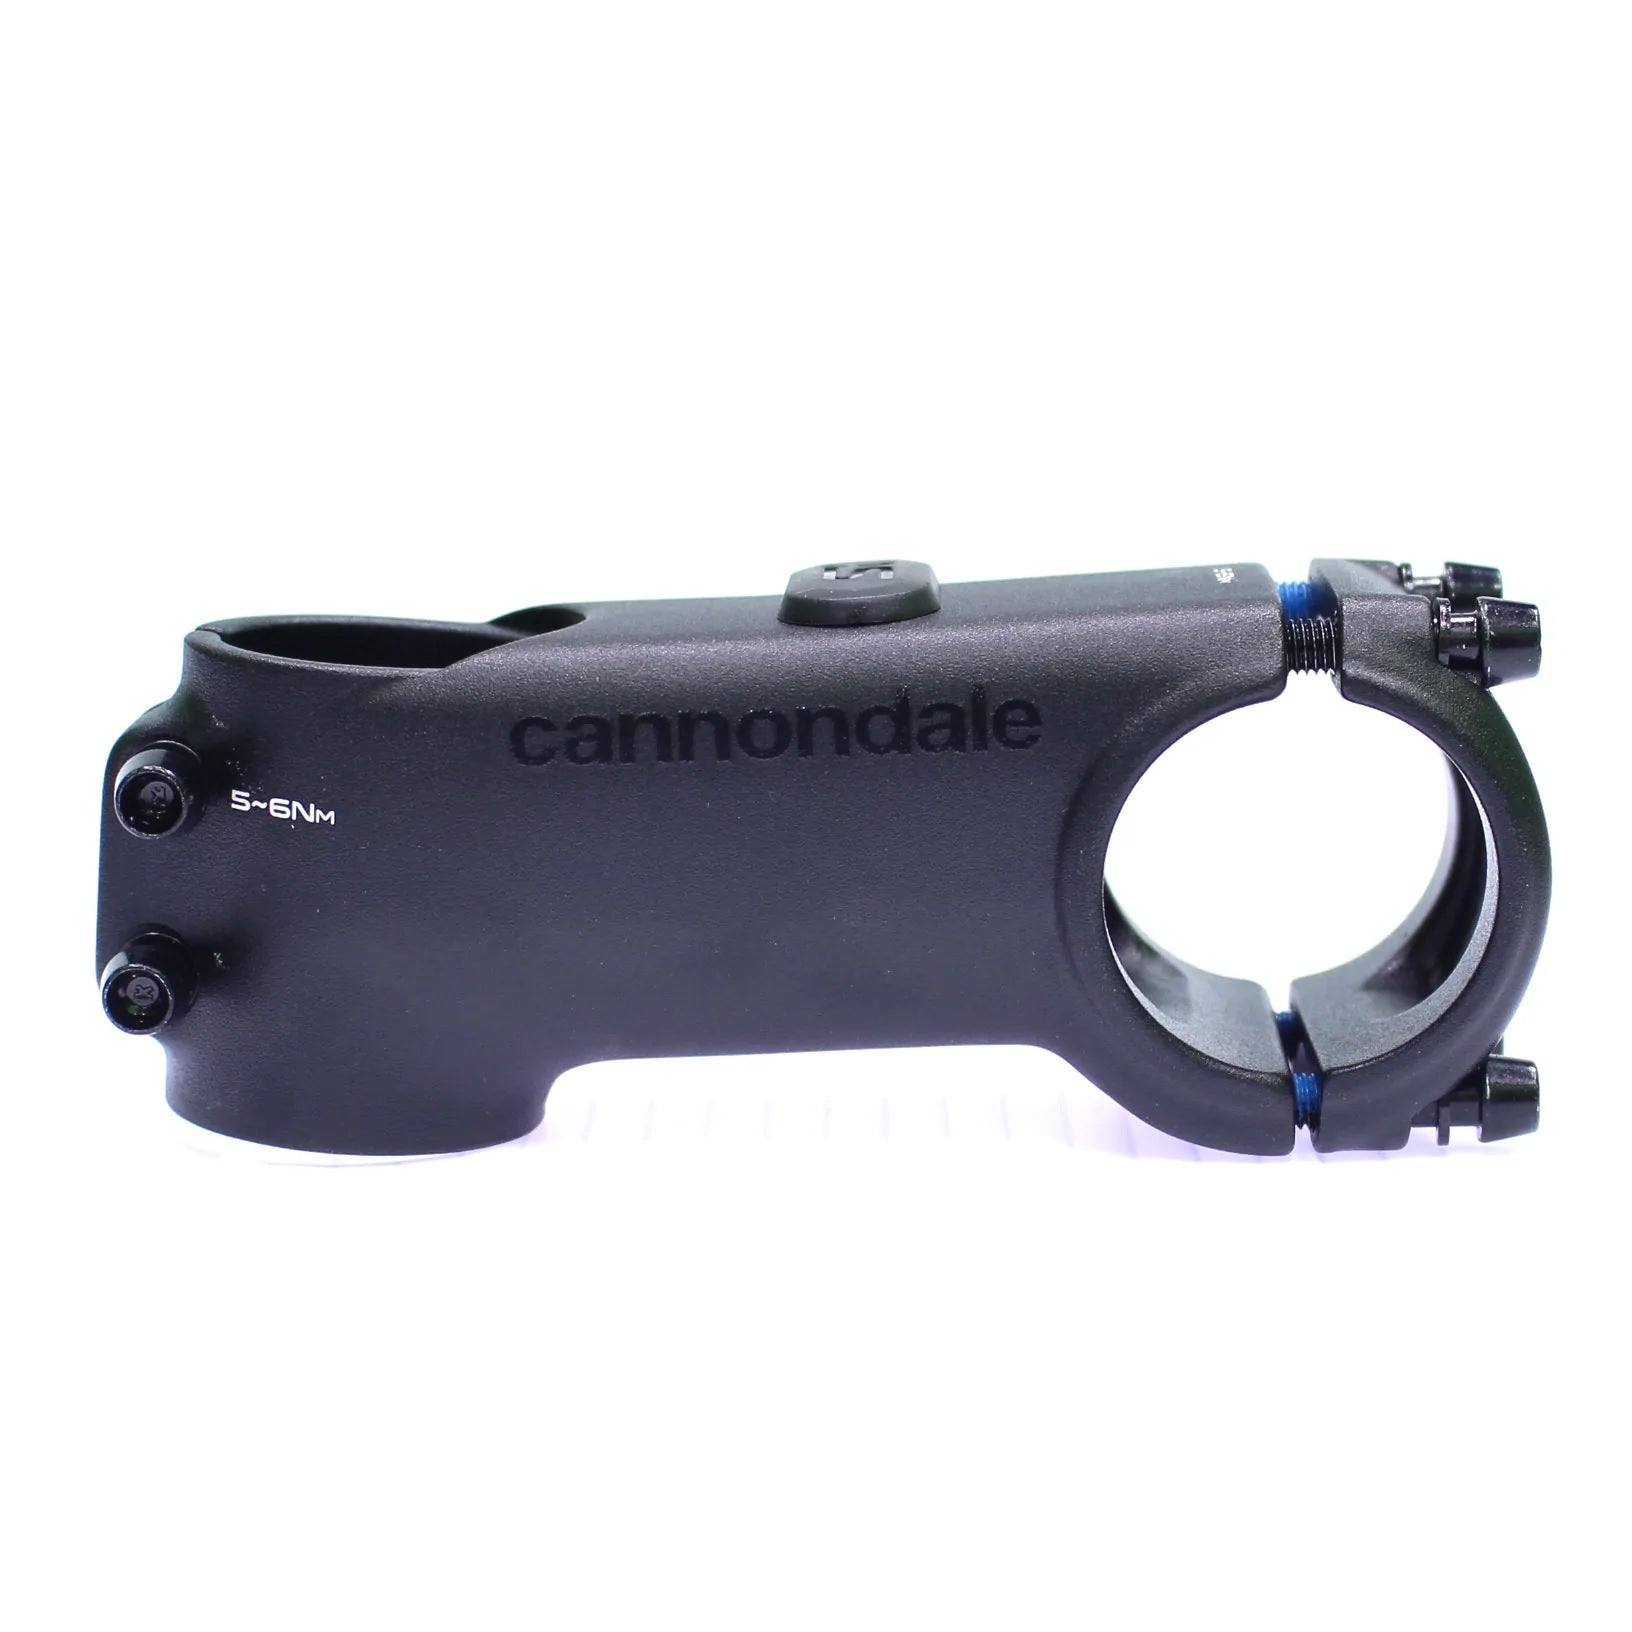 Cannondale C3 Stem with Intellimount